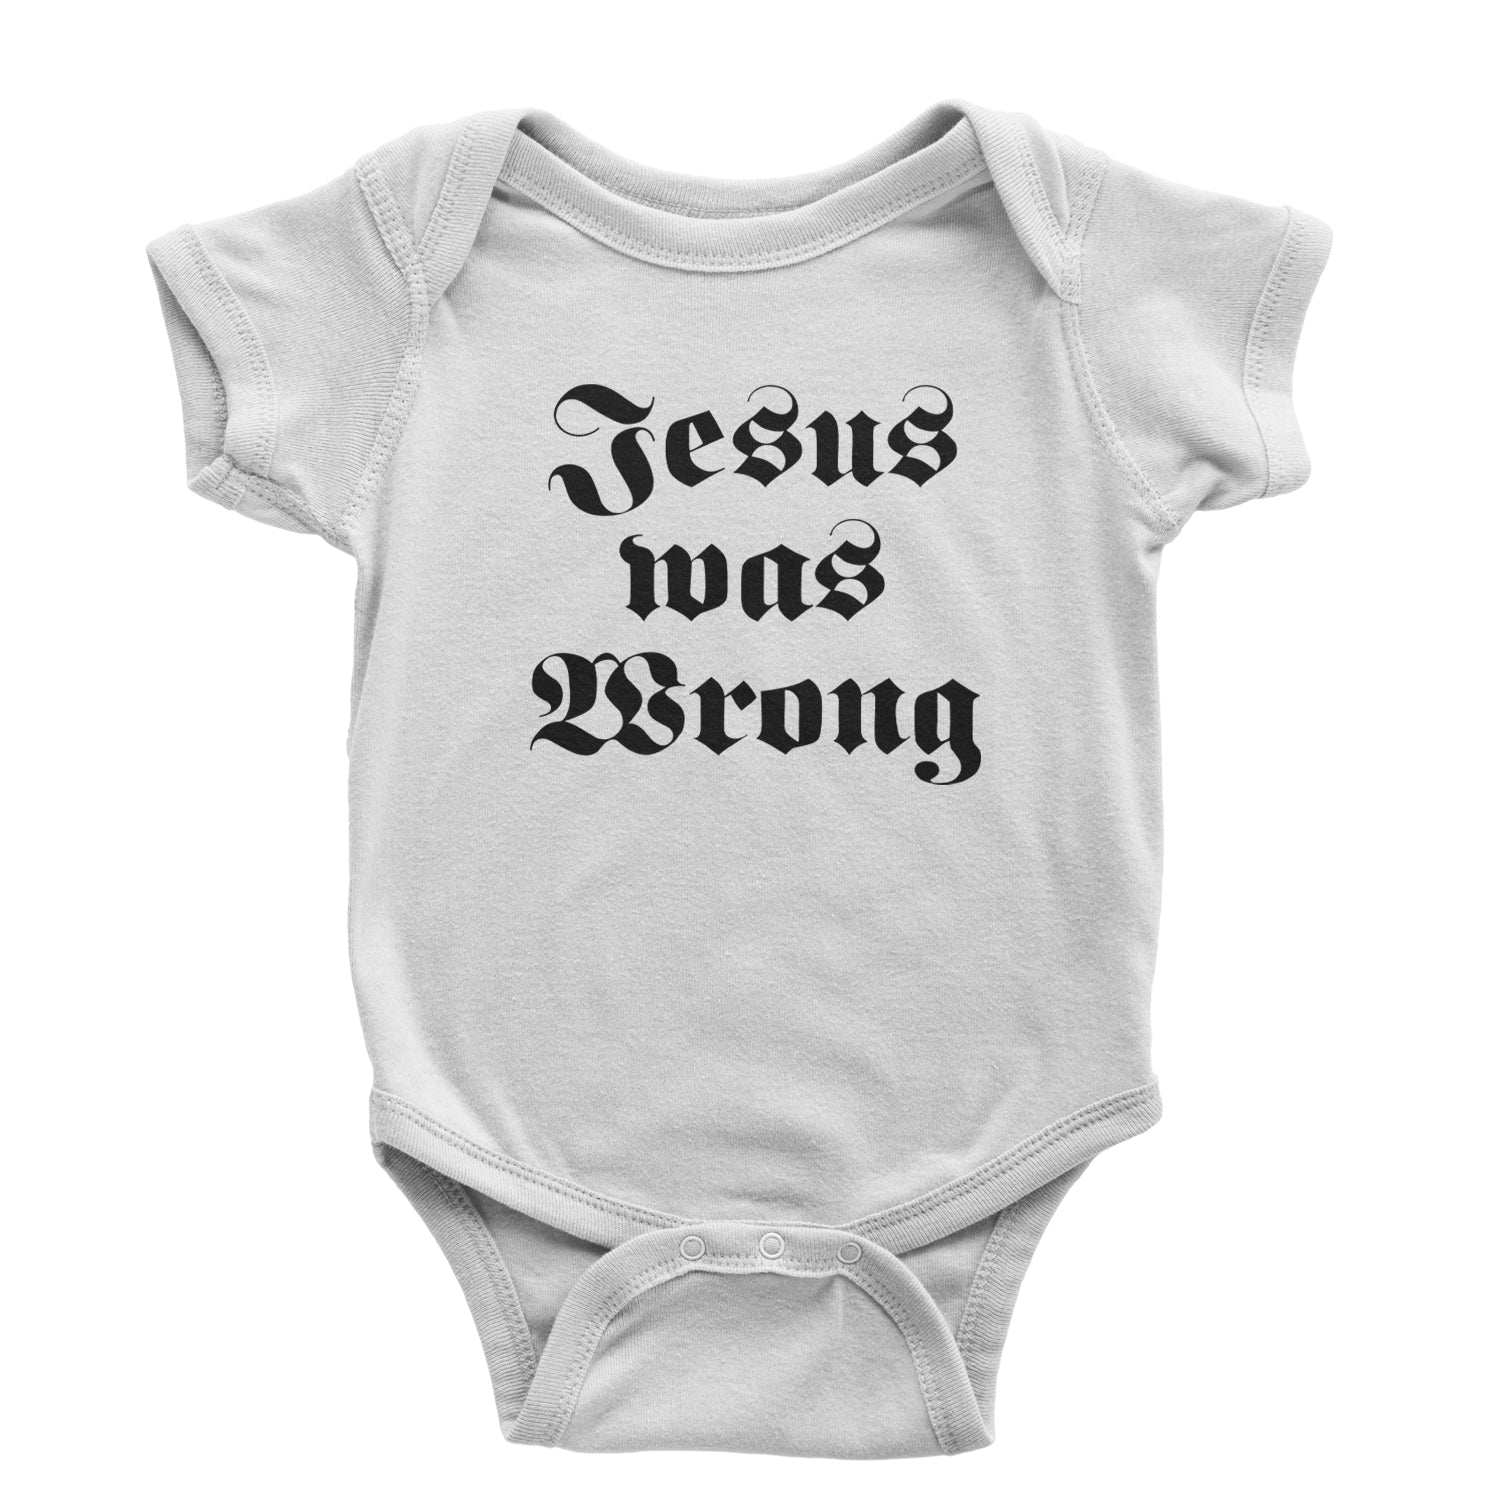 Jesus Was Wrong Little Miss Sunshine Infant One-Piece Romper Bodysuit and Toddler T-shirt breslin, dano, movie, paul, shine, shirt, sun by Expression Tees